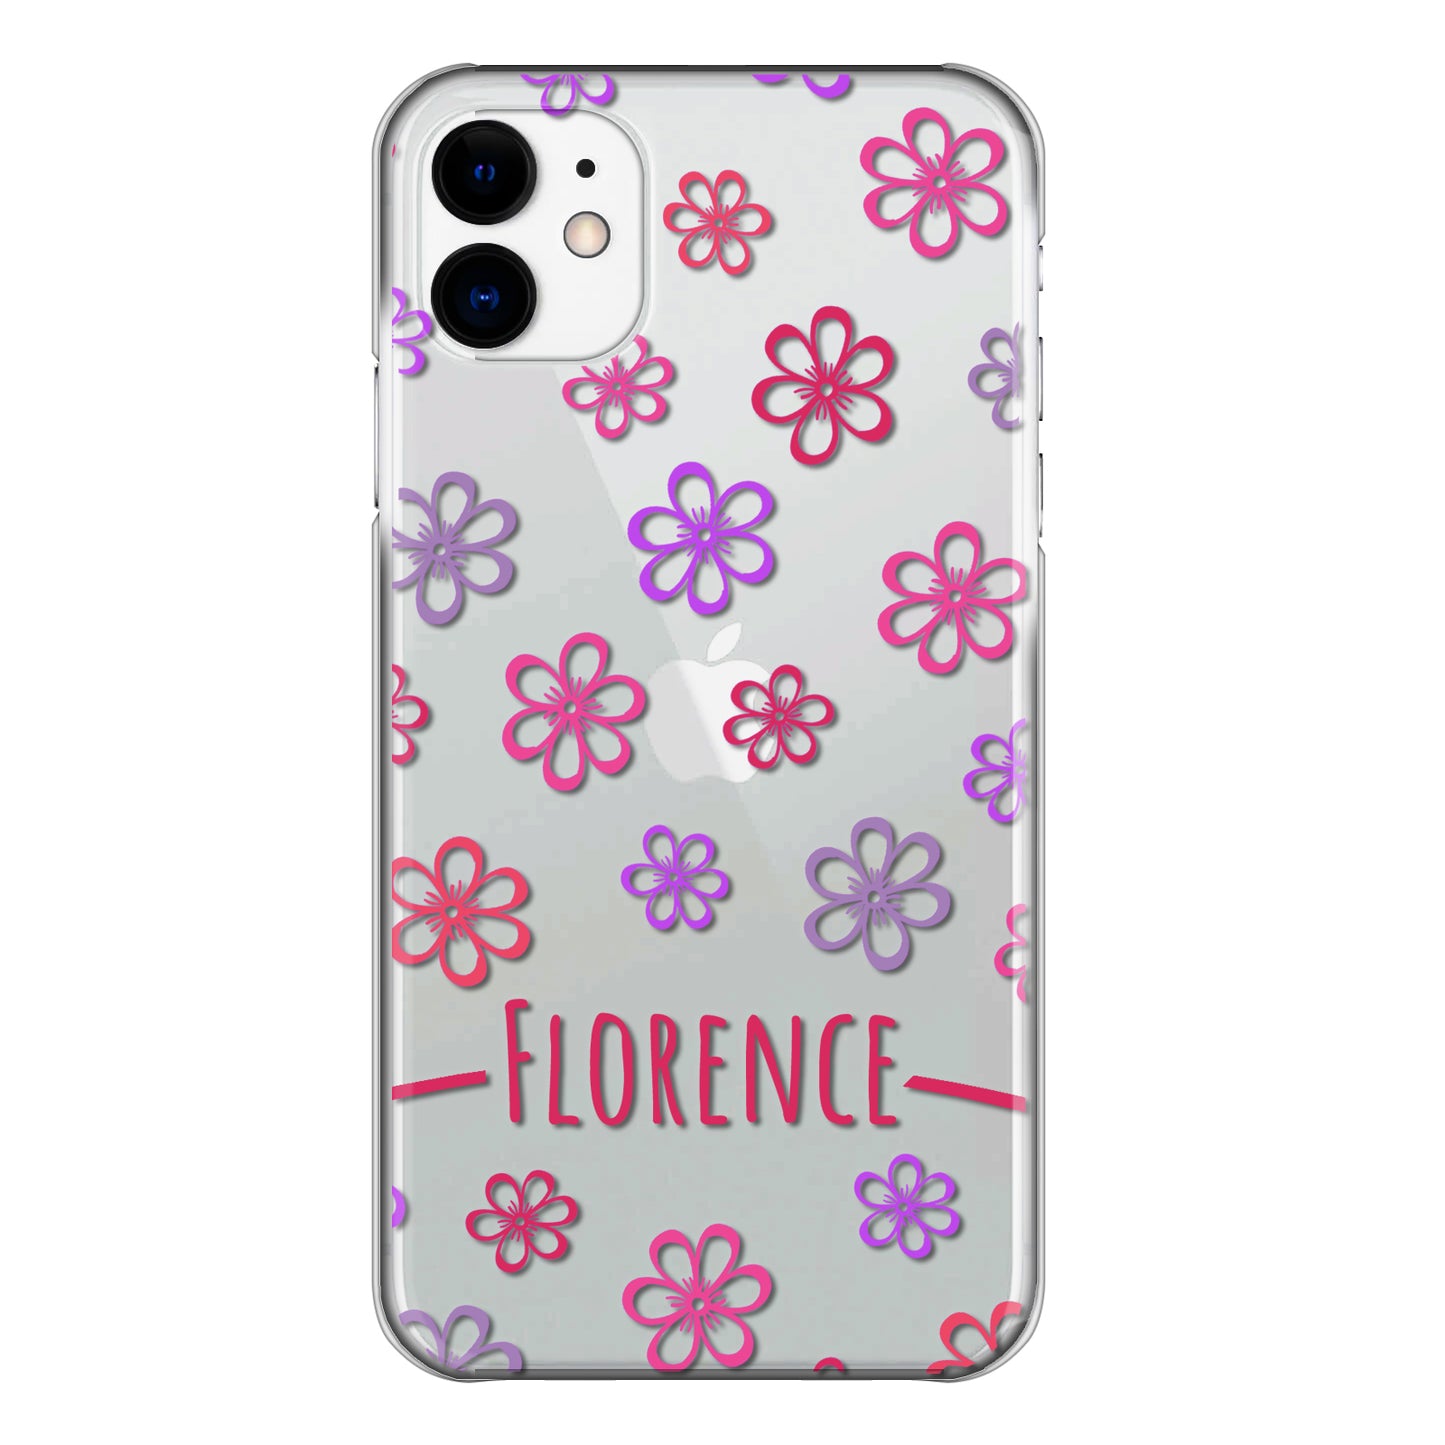 Personalised Motorola Phone Hard Case with Colourful Flowers and Cute Pink Text